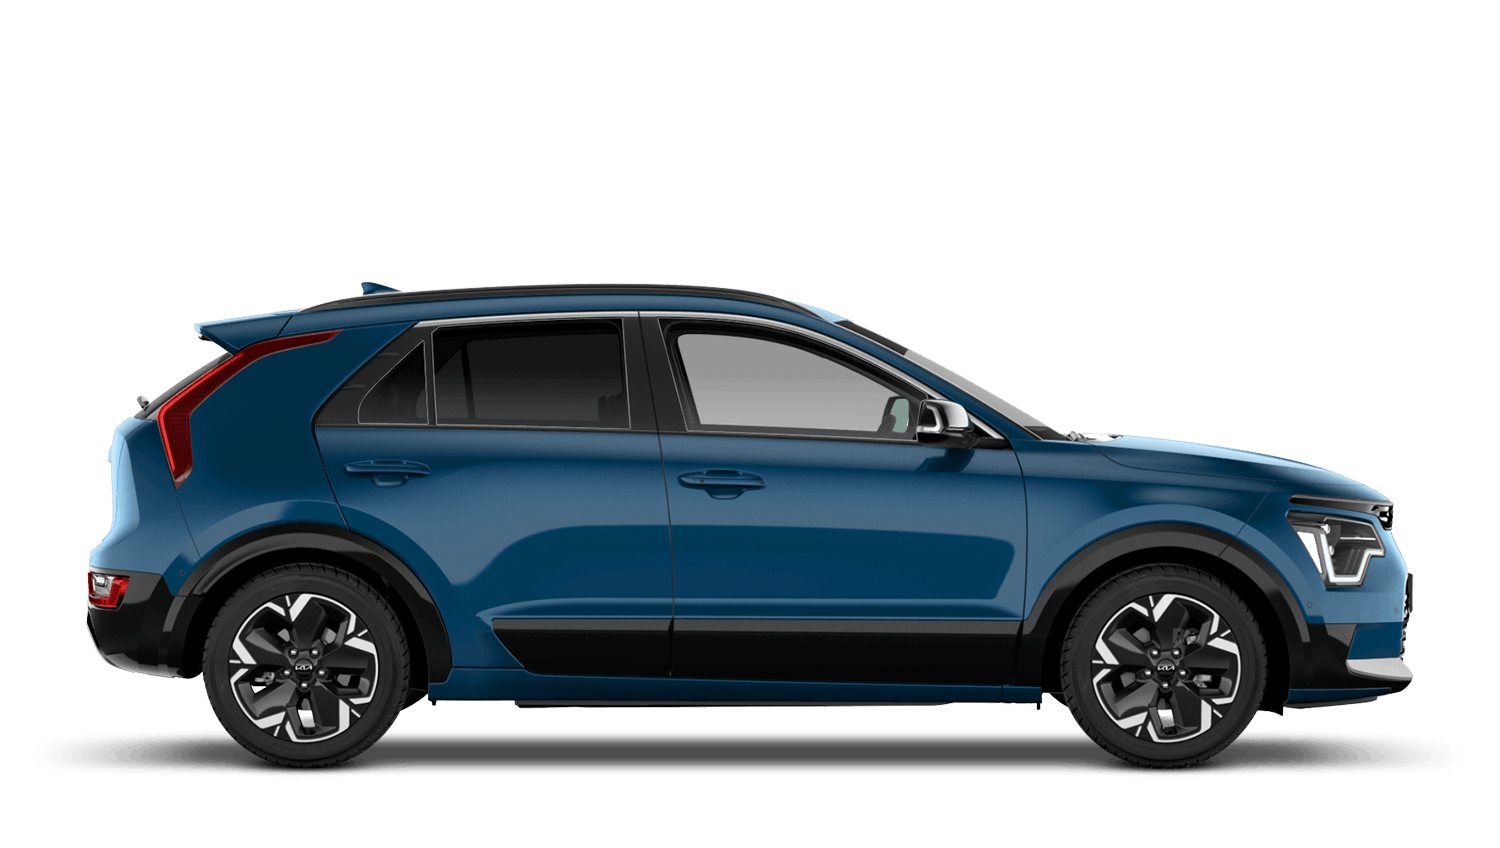 The All-New Niro EV. Powered by inspiration - up to 285 mile range on a single charge